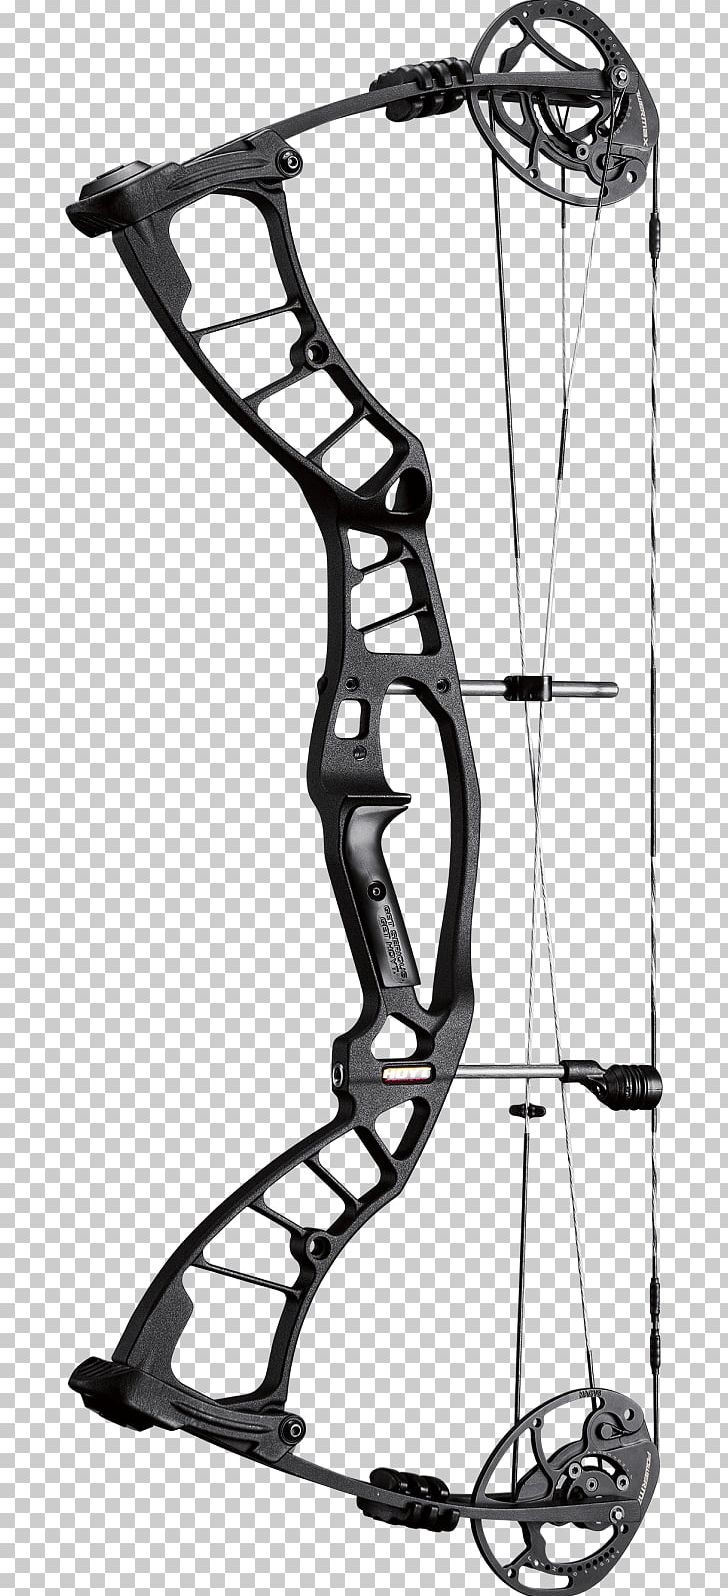 Bowhunting Compound Bows Archery Bow And Arrow PNG, Clipart, Angle, Archery, Bicycle Accessory, Bicycle Frame, Bow And Arrow Free PNG Download